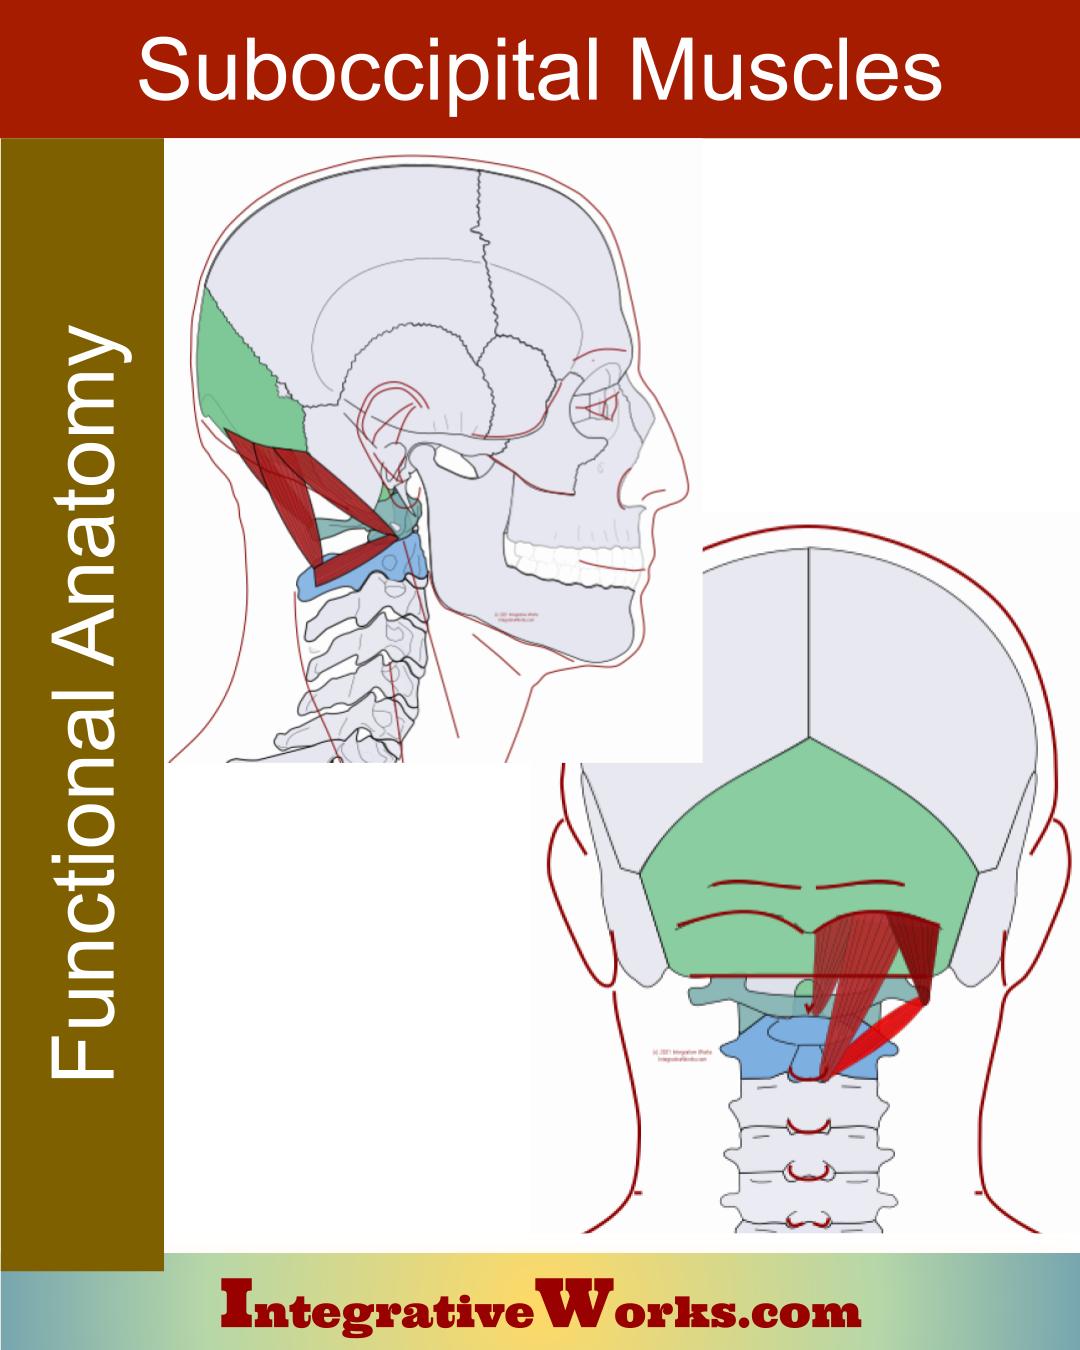 Suboccipital Muscles Functional Anatomy Integrative Works 5041